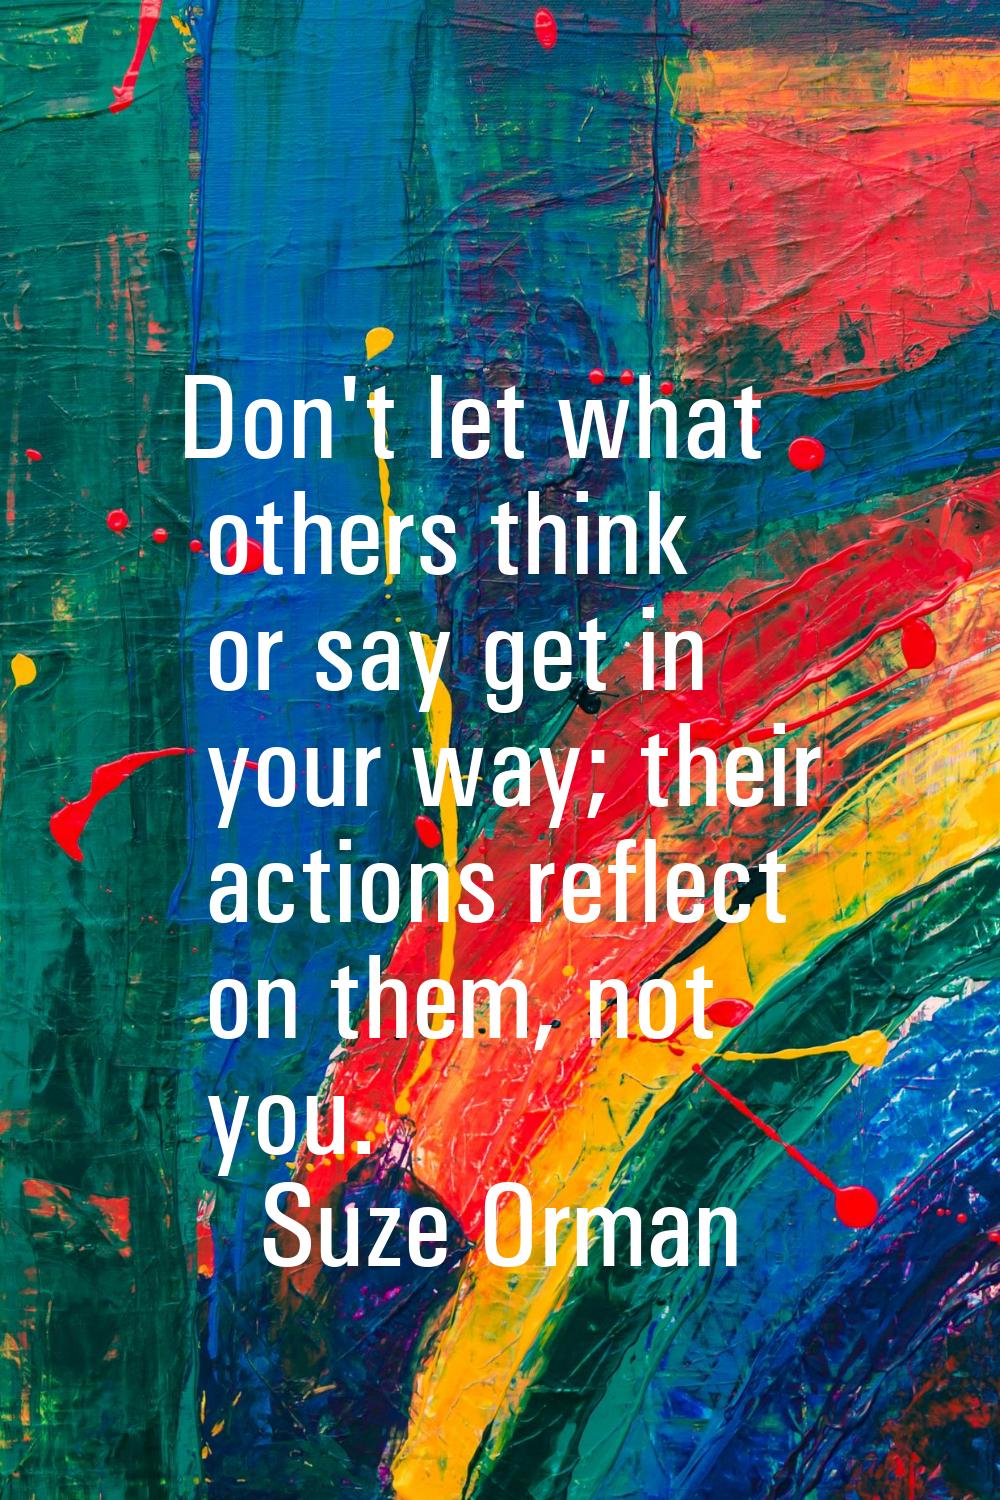 Don't let what others think or say get in your way; their actions reflect on them, not you.